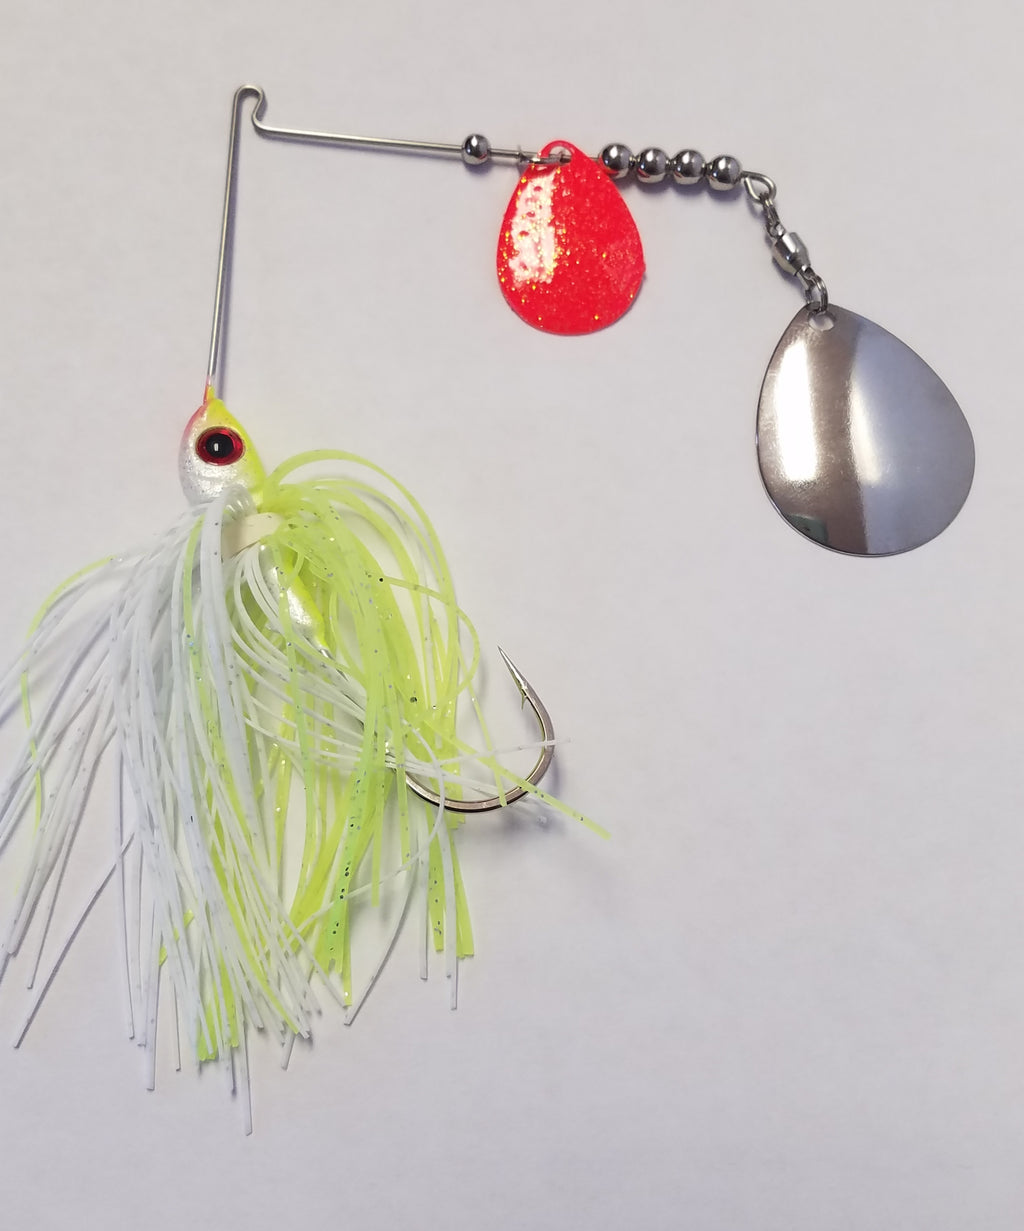 X-TACKLE BOOBY Tailspinner Jigspinner Spinnerbait Fishing Lure #BLUE SKY